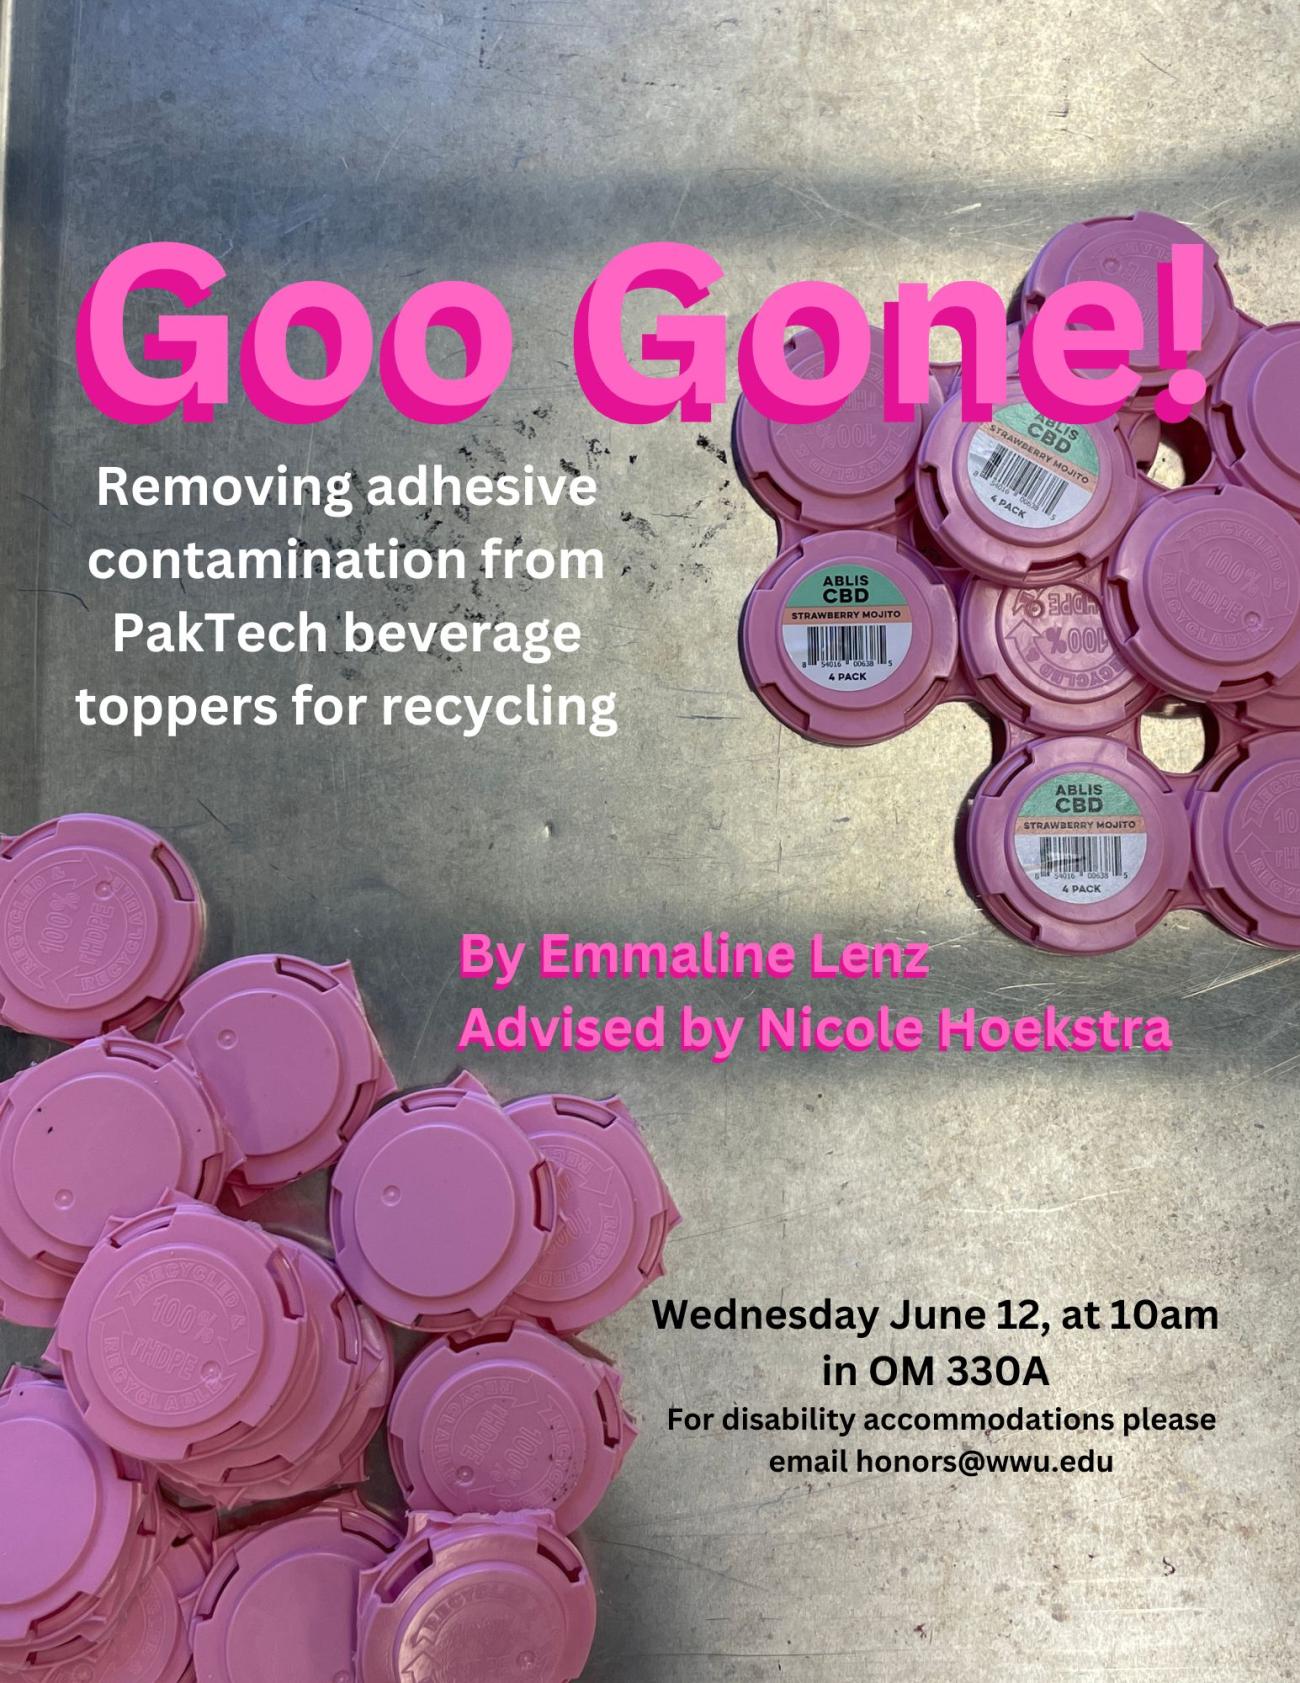 A sliver background scattered with pink Paktech beverage toppers. Text reads: Goo Gone! Removing adhesive contamination from PakTech beverage toppers for recycling. By Emmaline Lenz. Advised by Nicole Hoekstra. Wednesday June 12, at 10am in OM 330A. For disability accommodations please email honors@wwu.edu.